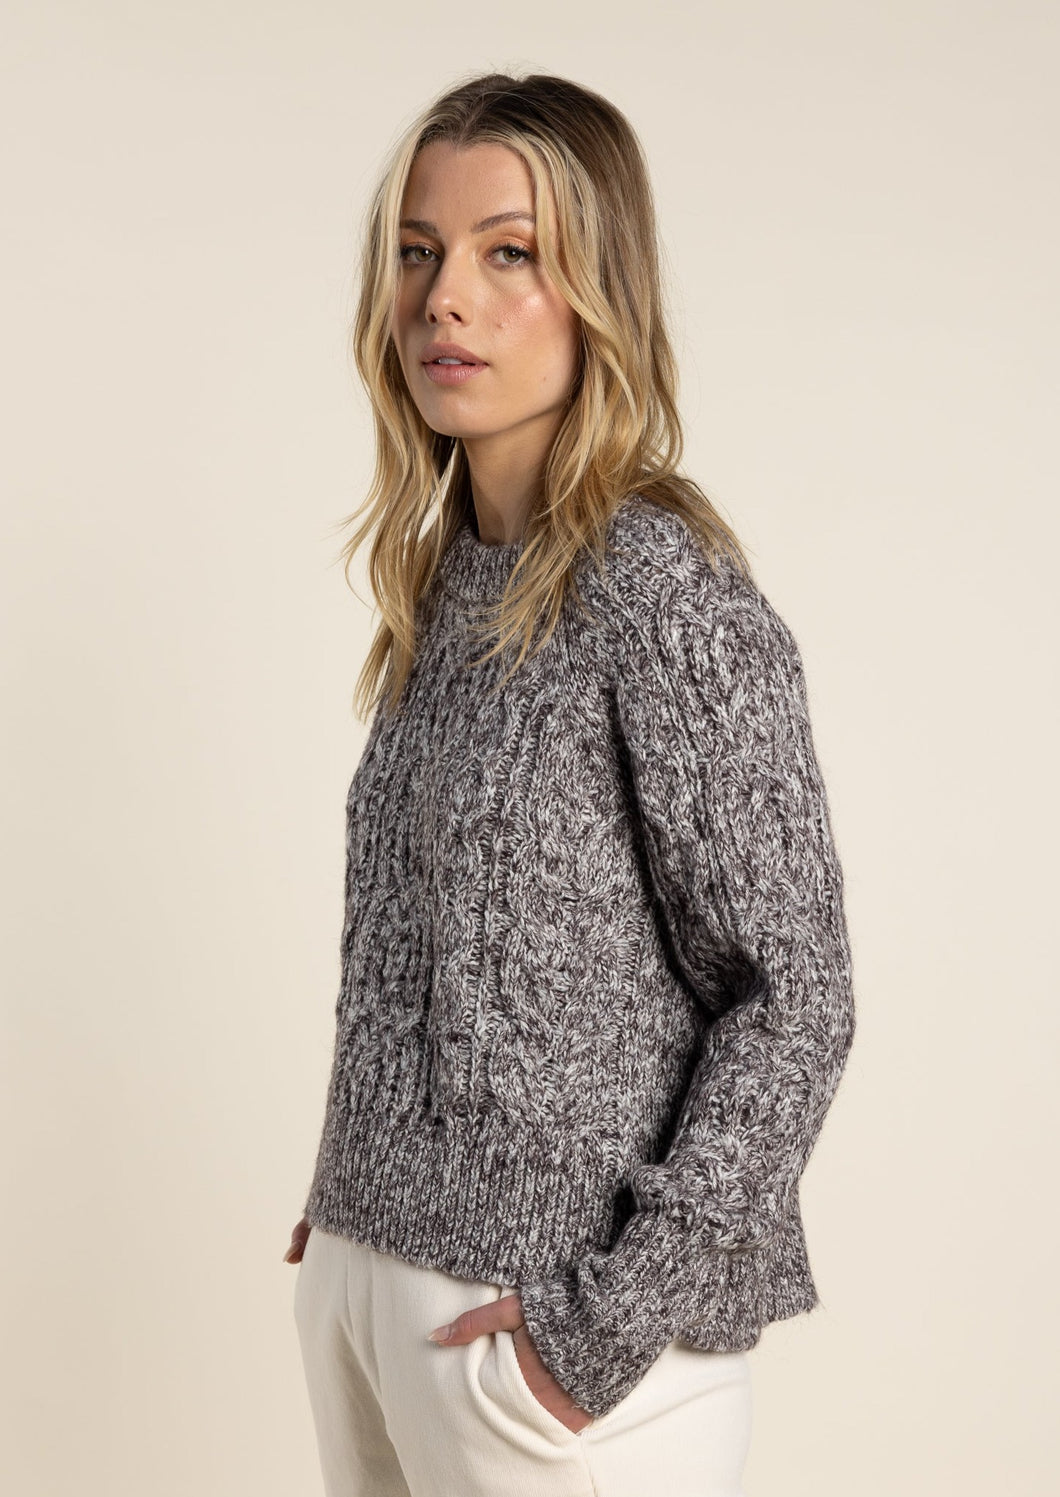 Two T's Crew Neck Cable Knit - Clove - Sizes: XS S M L